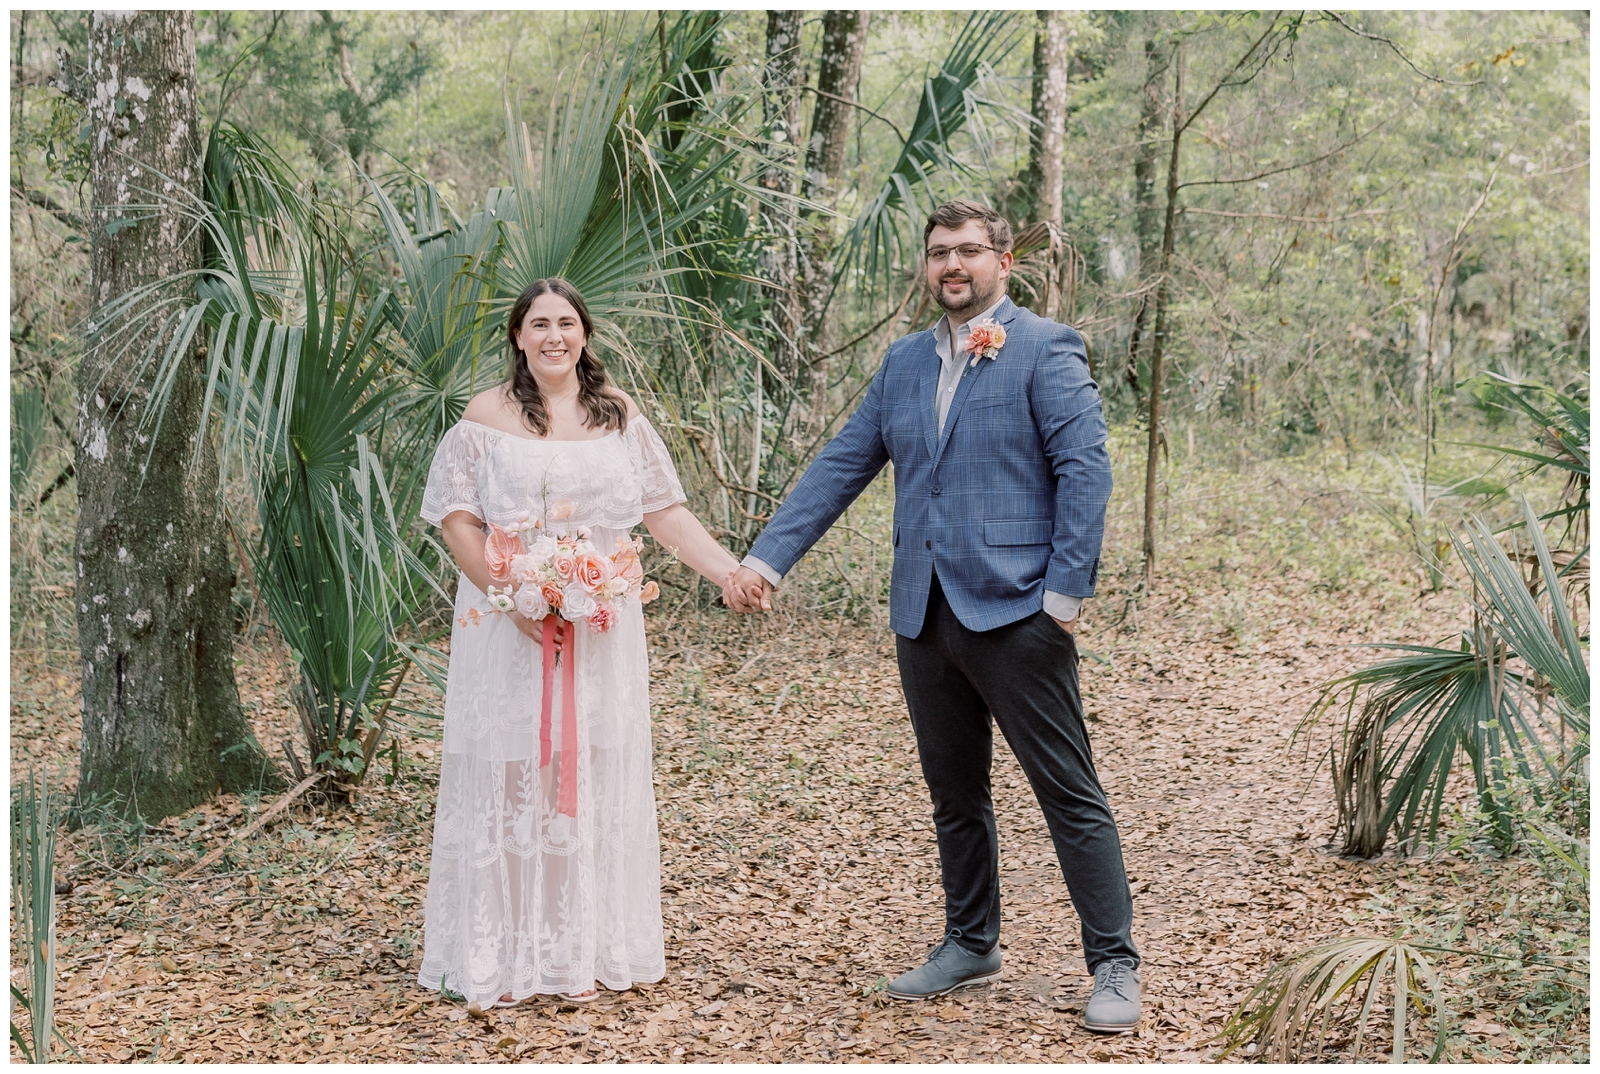 Couple holding hands and smiling in the park surrounded by Florida foliage on their wedding day.